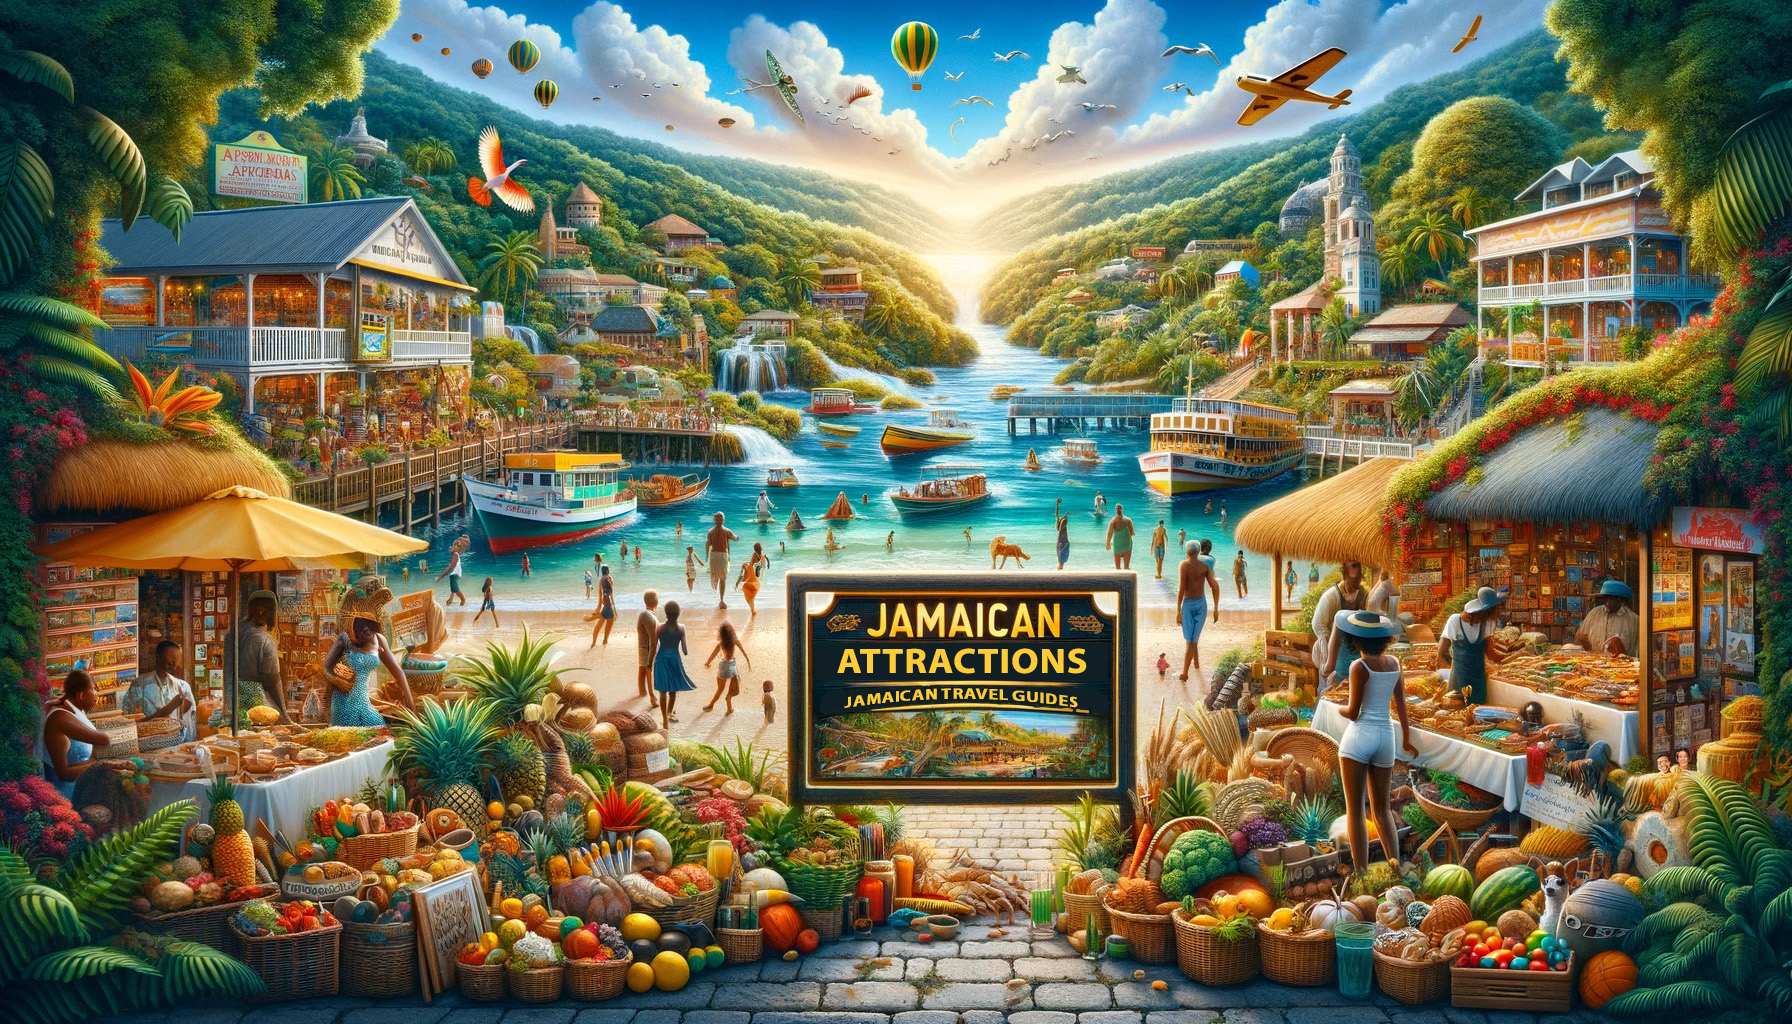 Jamaican Attractions - Jamaican Travel Guides